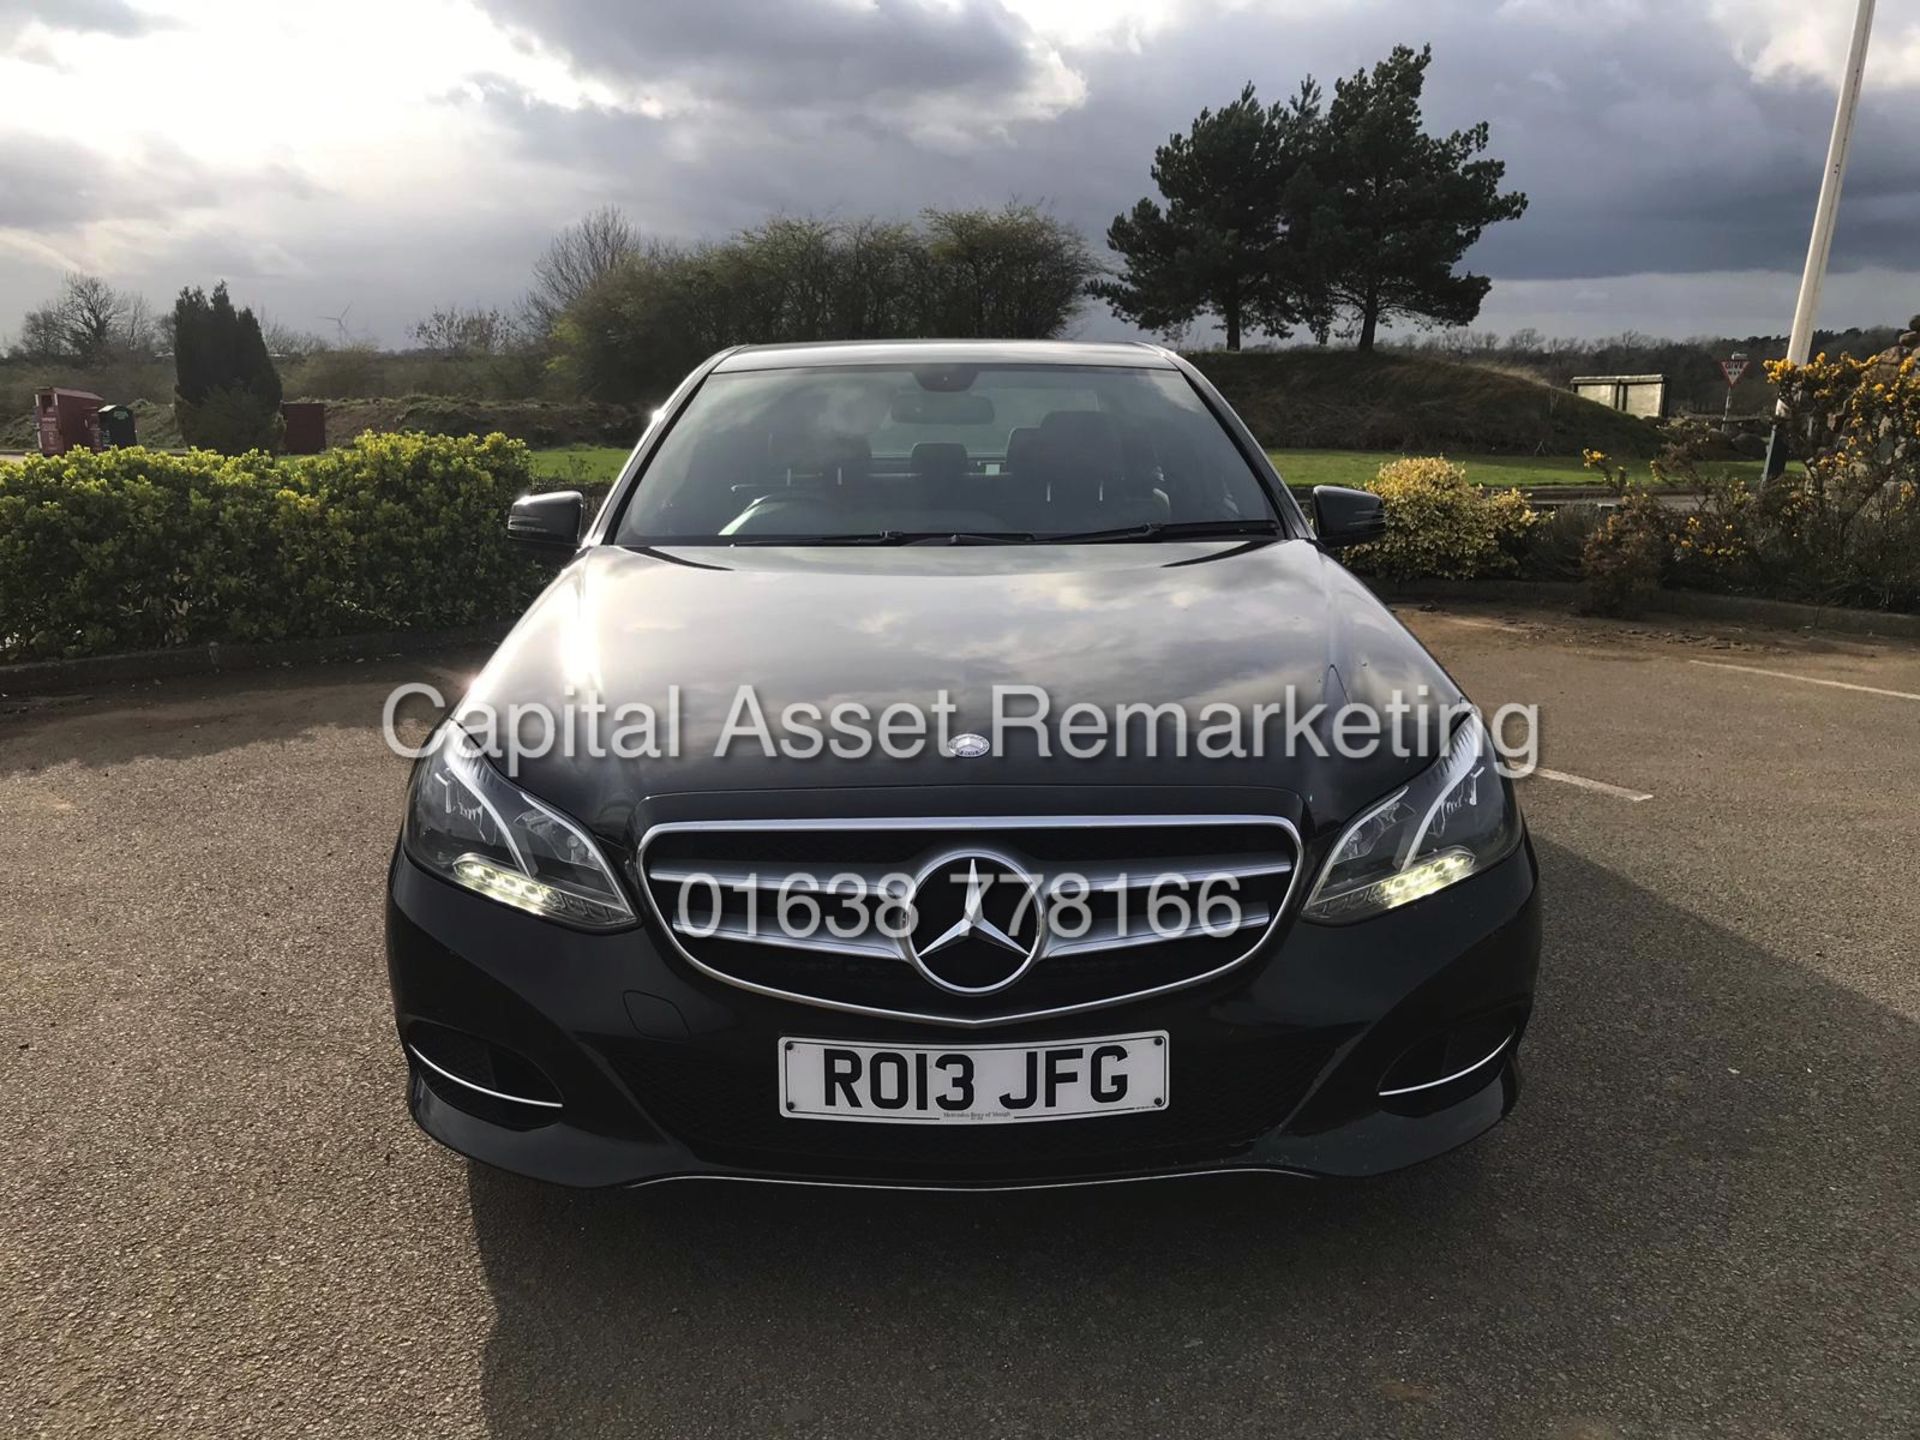 MERCEDES E220d "SPECIAL EQUIPMENT" 7G TRONIC (13 REG - NEW SHAPE) COMAND SAT NAV - LEATHER *LOOK* - Image 2 of 13